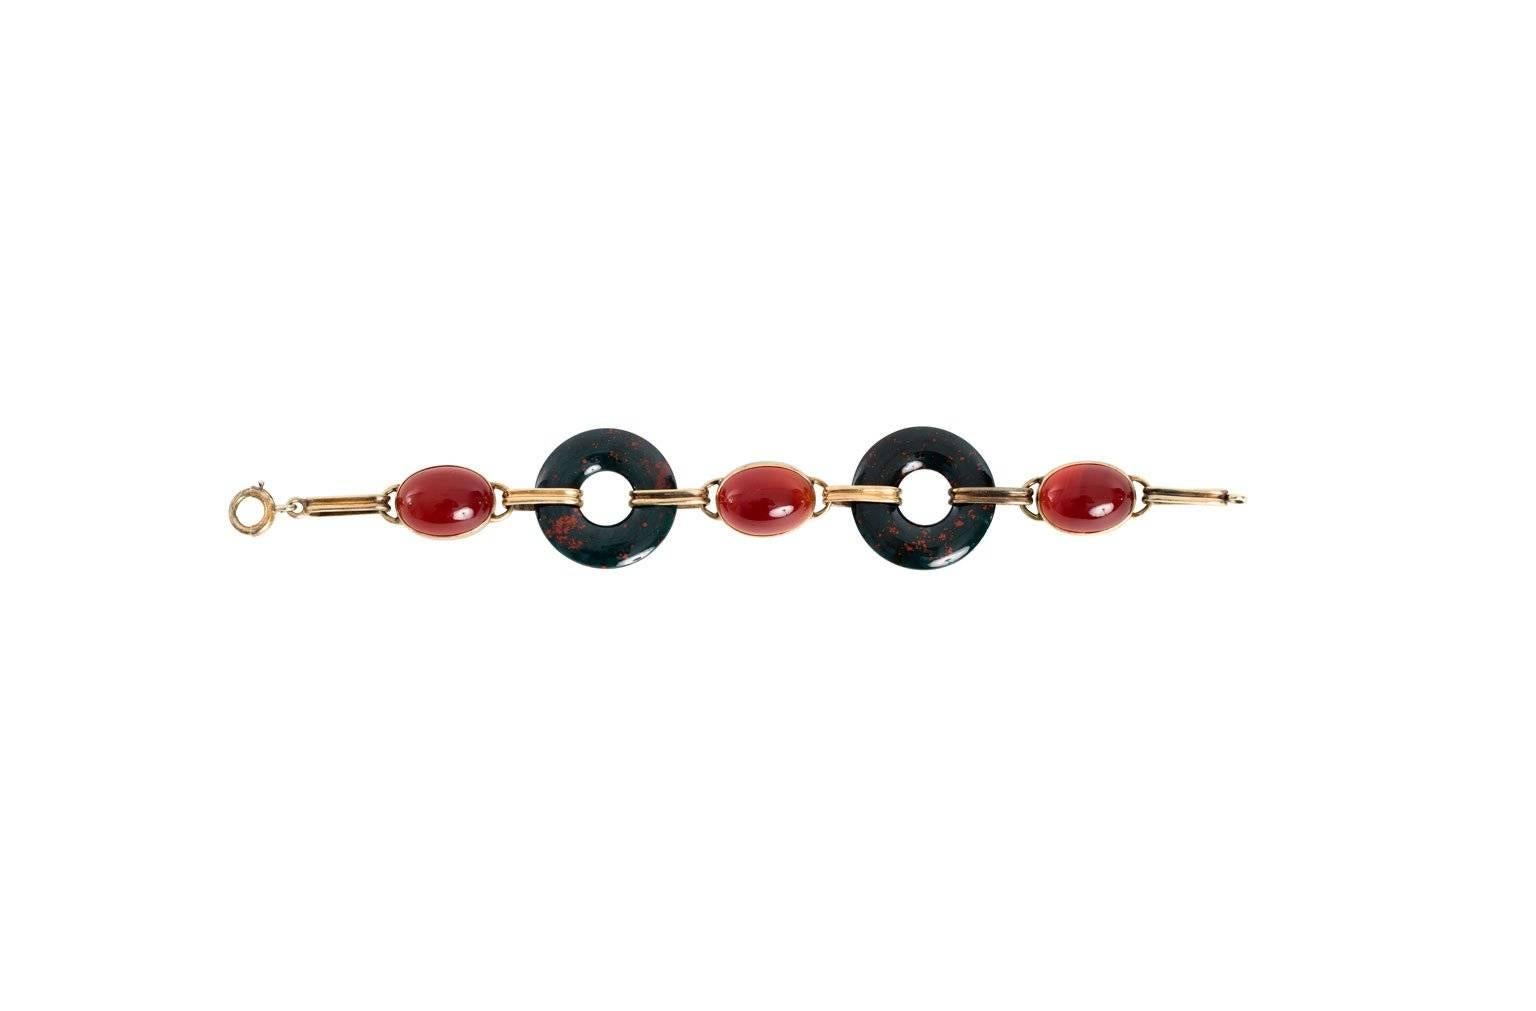 1940's agate link bracelet made up of black onyx, amber carnelian, and 14K gold. Length: 7 inches